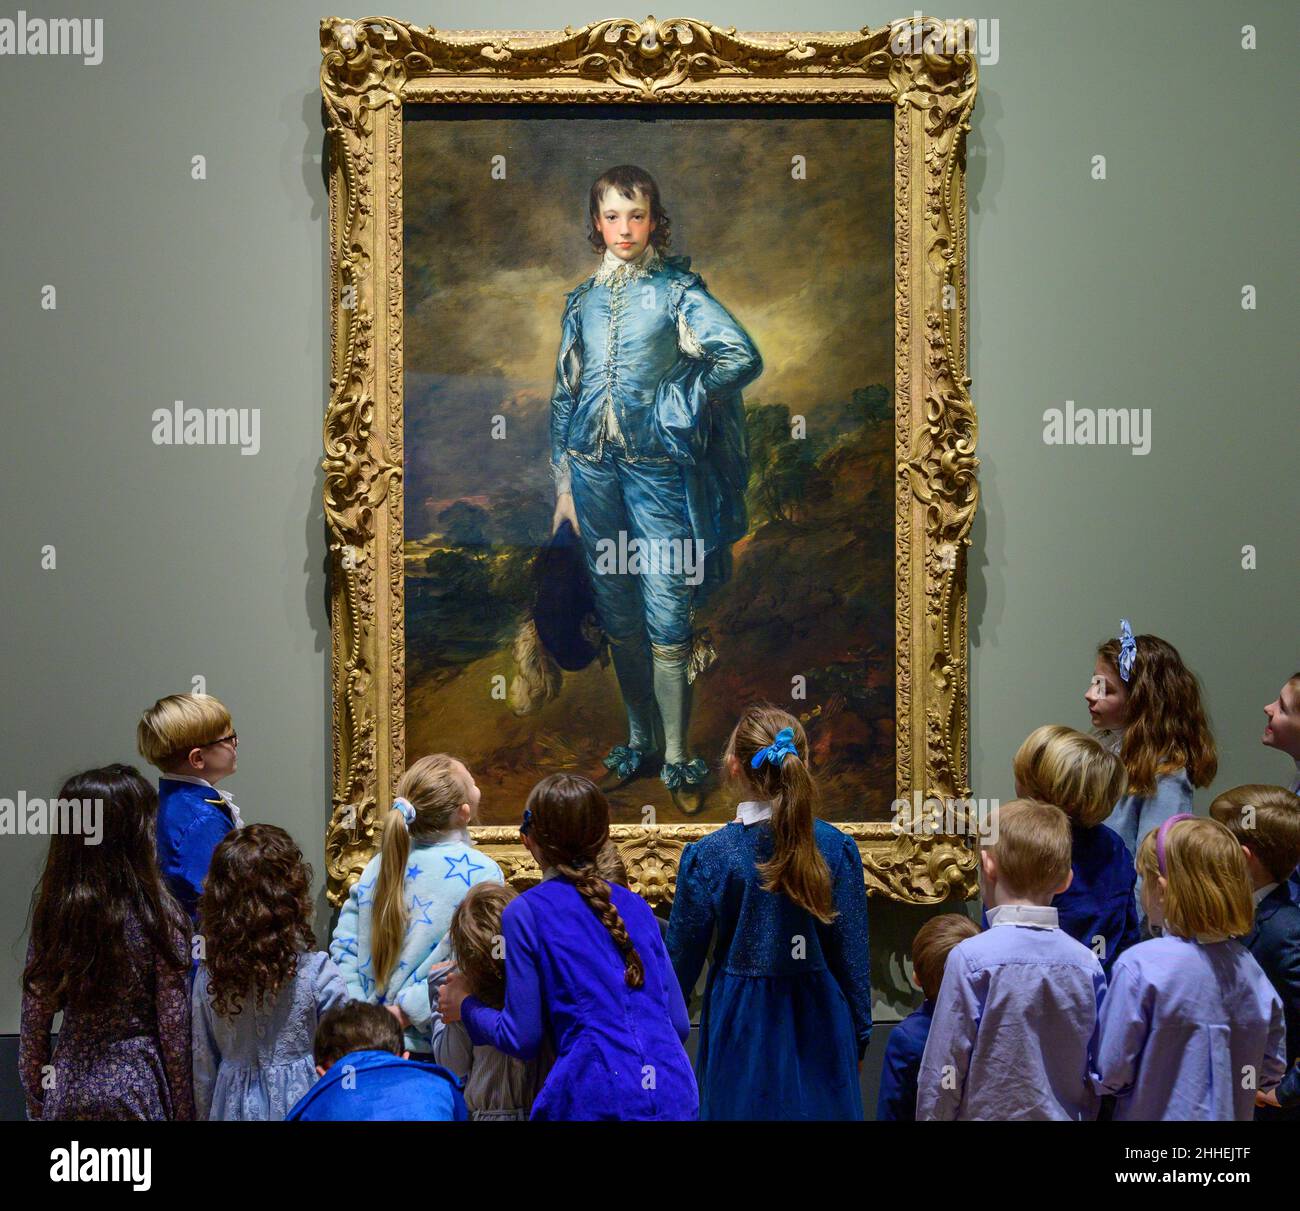 The National Gallery, London, UK. 24 January 2022. ‘The Blue Boy’, 1770, by Thomas Gainsborough goes on display at the National Gallery on the 100th anniversary of its last presentation in the UK. The work is now owned by the Huntington Library, Art Museum, and Botanical Gardens in San Marino, California where it has been on display for the past century. A group of ‘blue boys’, children of National Gallery staff and of the US Embassy in London, pose in front of the painting, all dressed in shades of blue with cravats to resemble the figure in the painting. Credit: Malcolm Park/Alamy Live News. Stock Photo